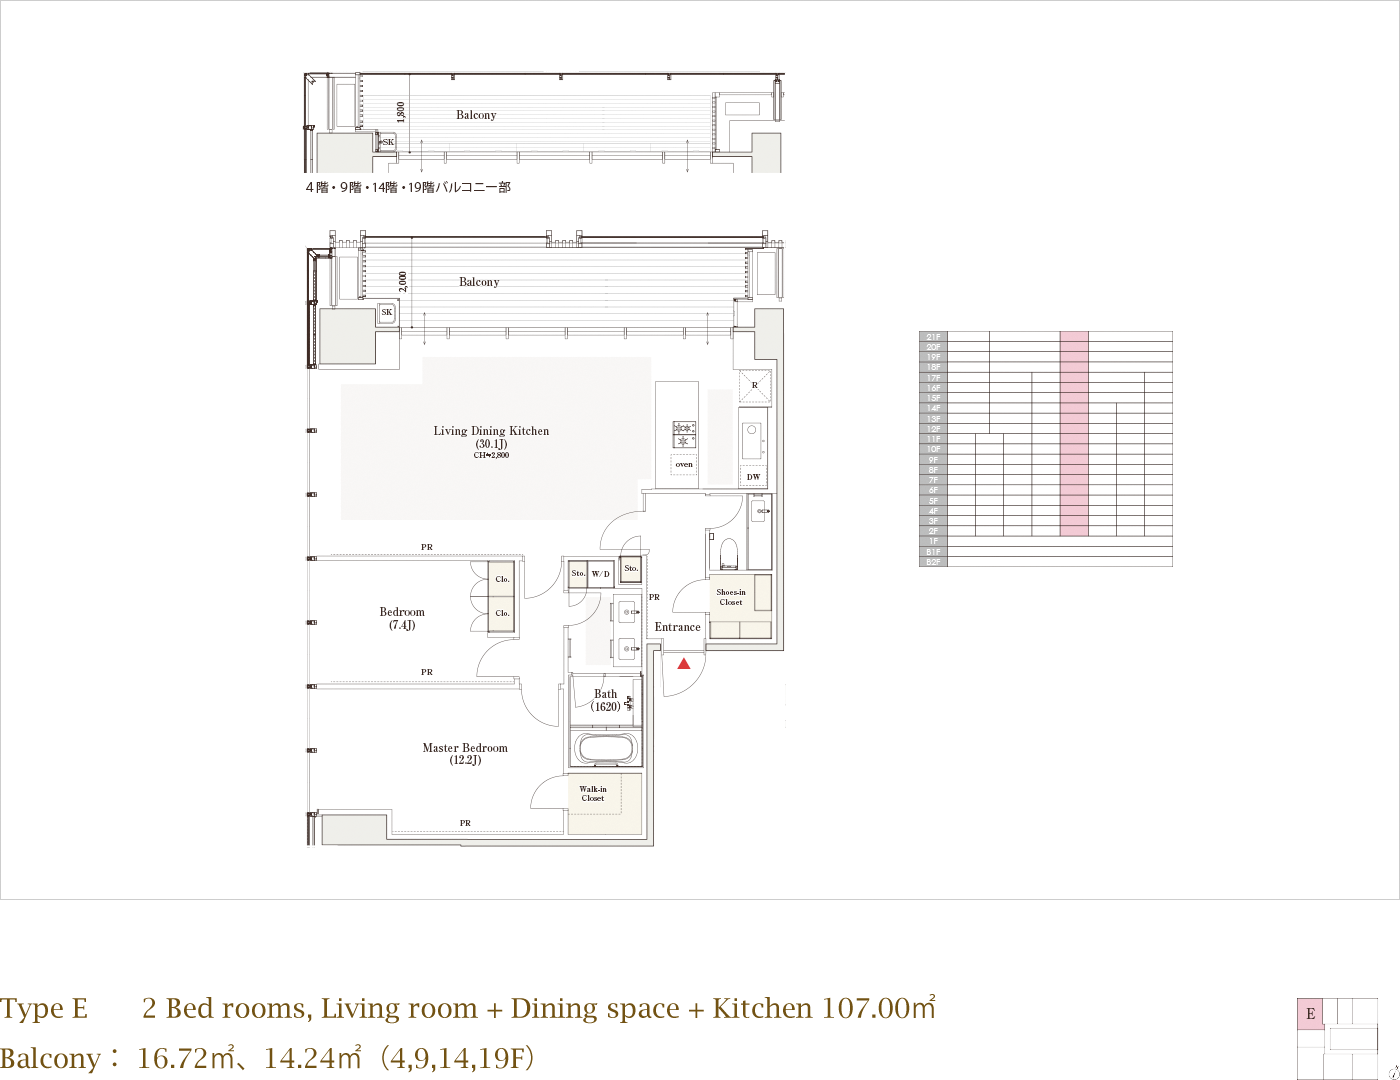 Type E 2 Bed rooms, Living room + Dining space + Kitchen 107.00m² Balcony 16.72m²,14.24m²(4F,9F,14F,19F)